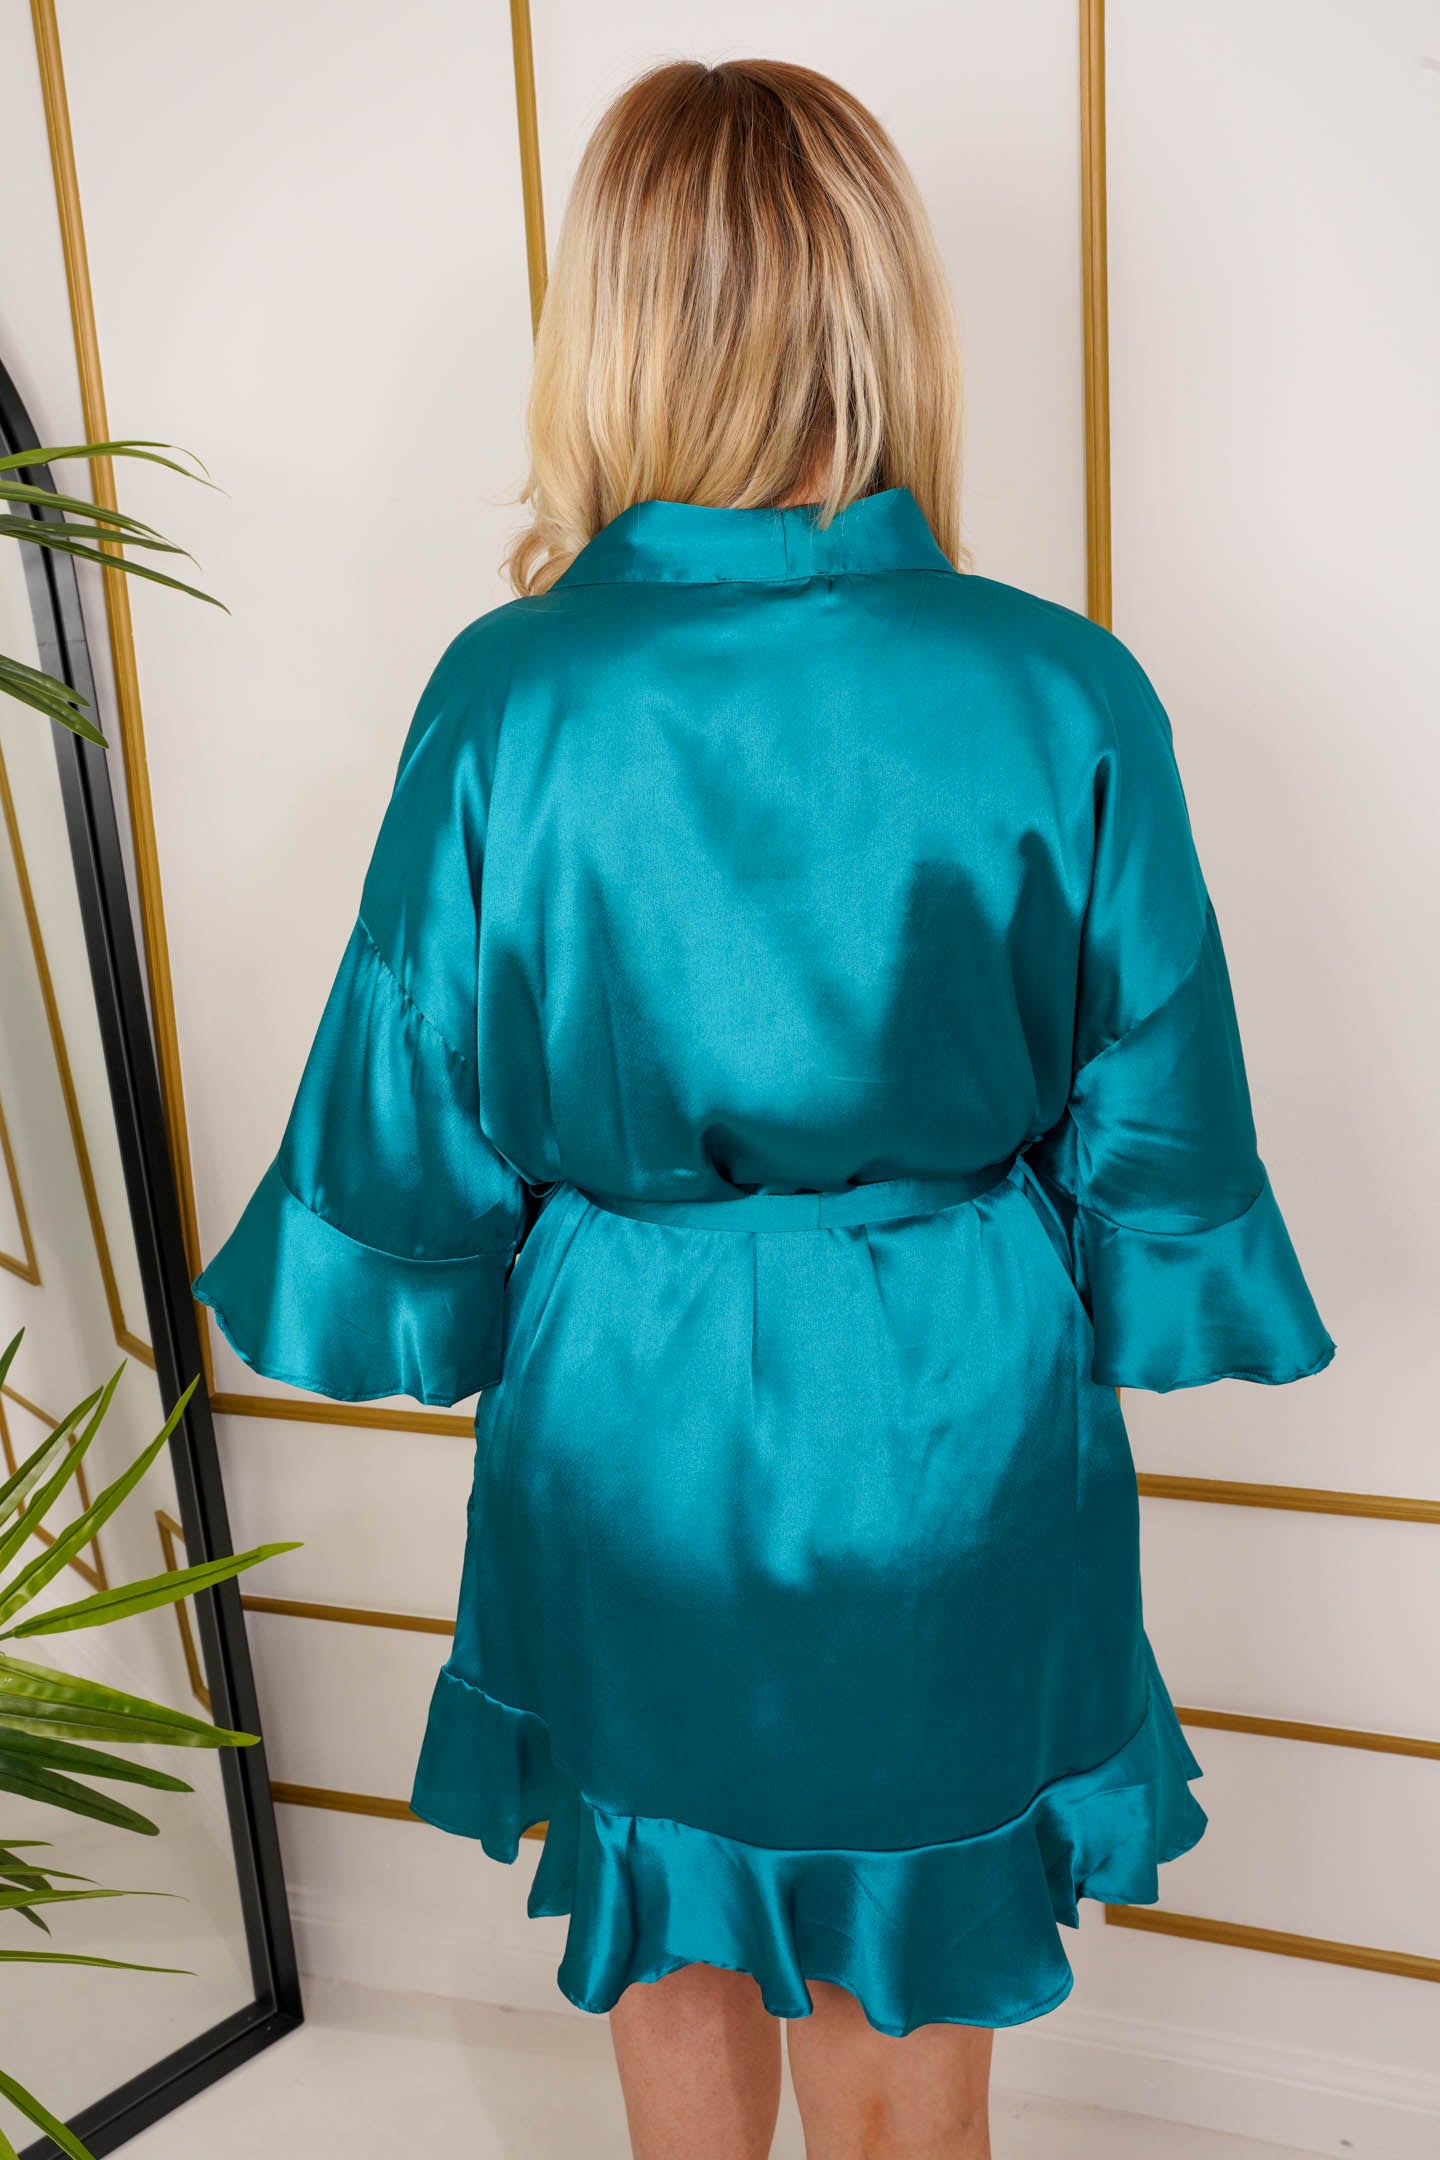 The Adriana – Teal Satin Dressing Gown: Angelic and Glamorous